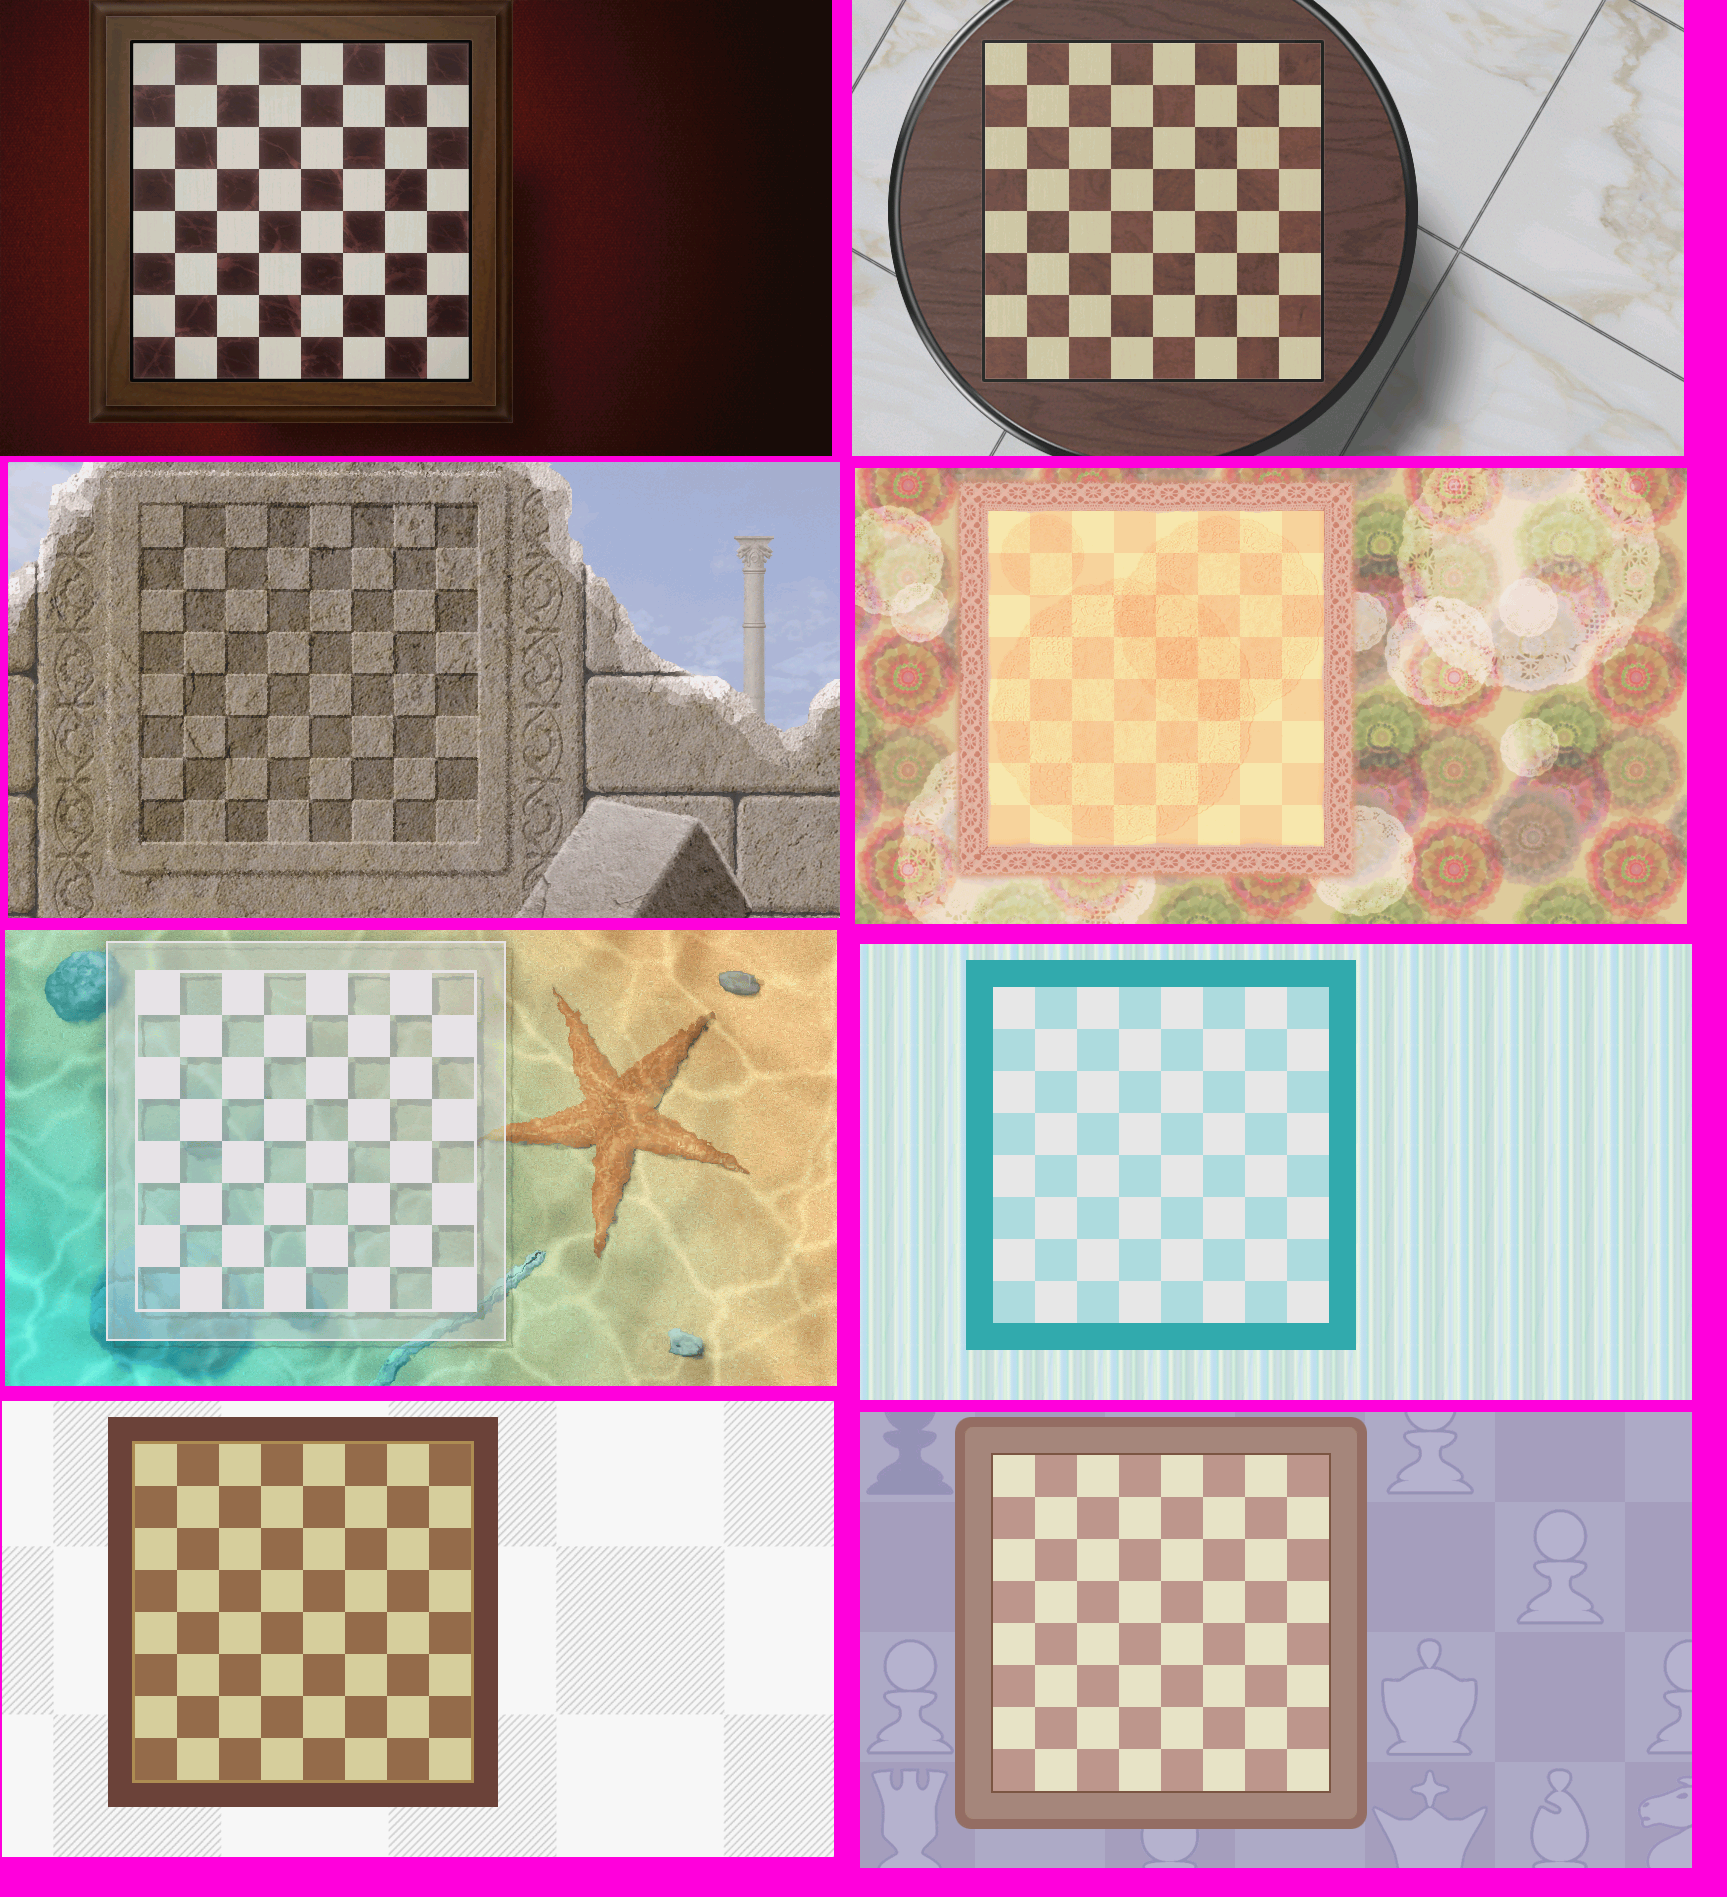 Wii Chess - Chessboards